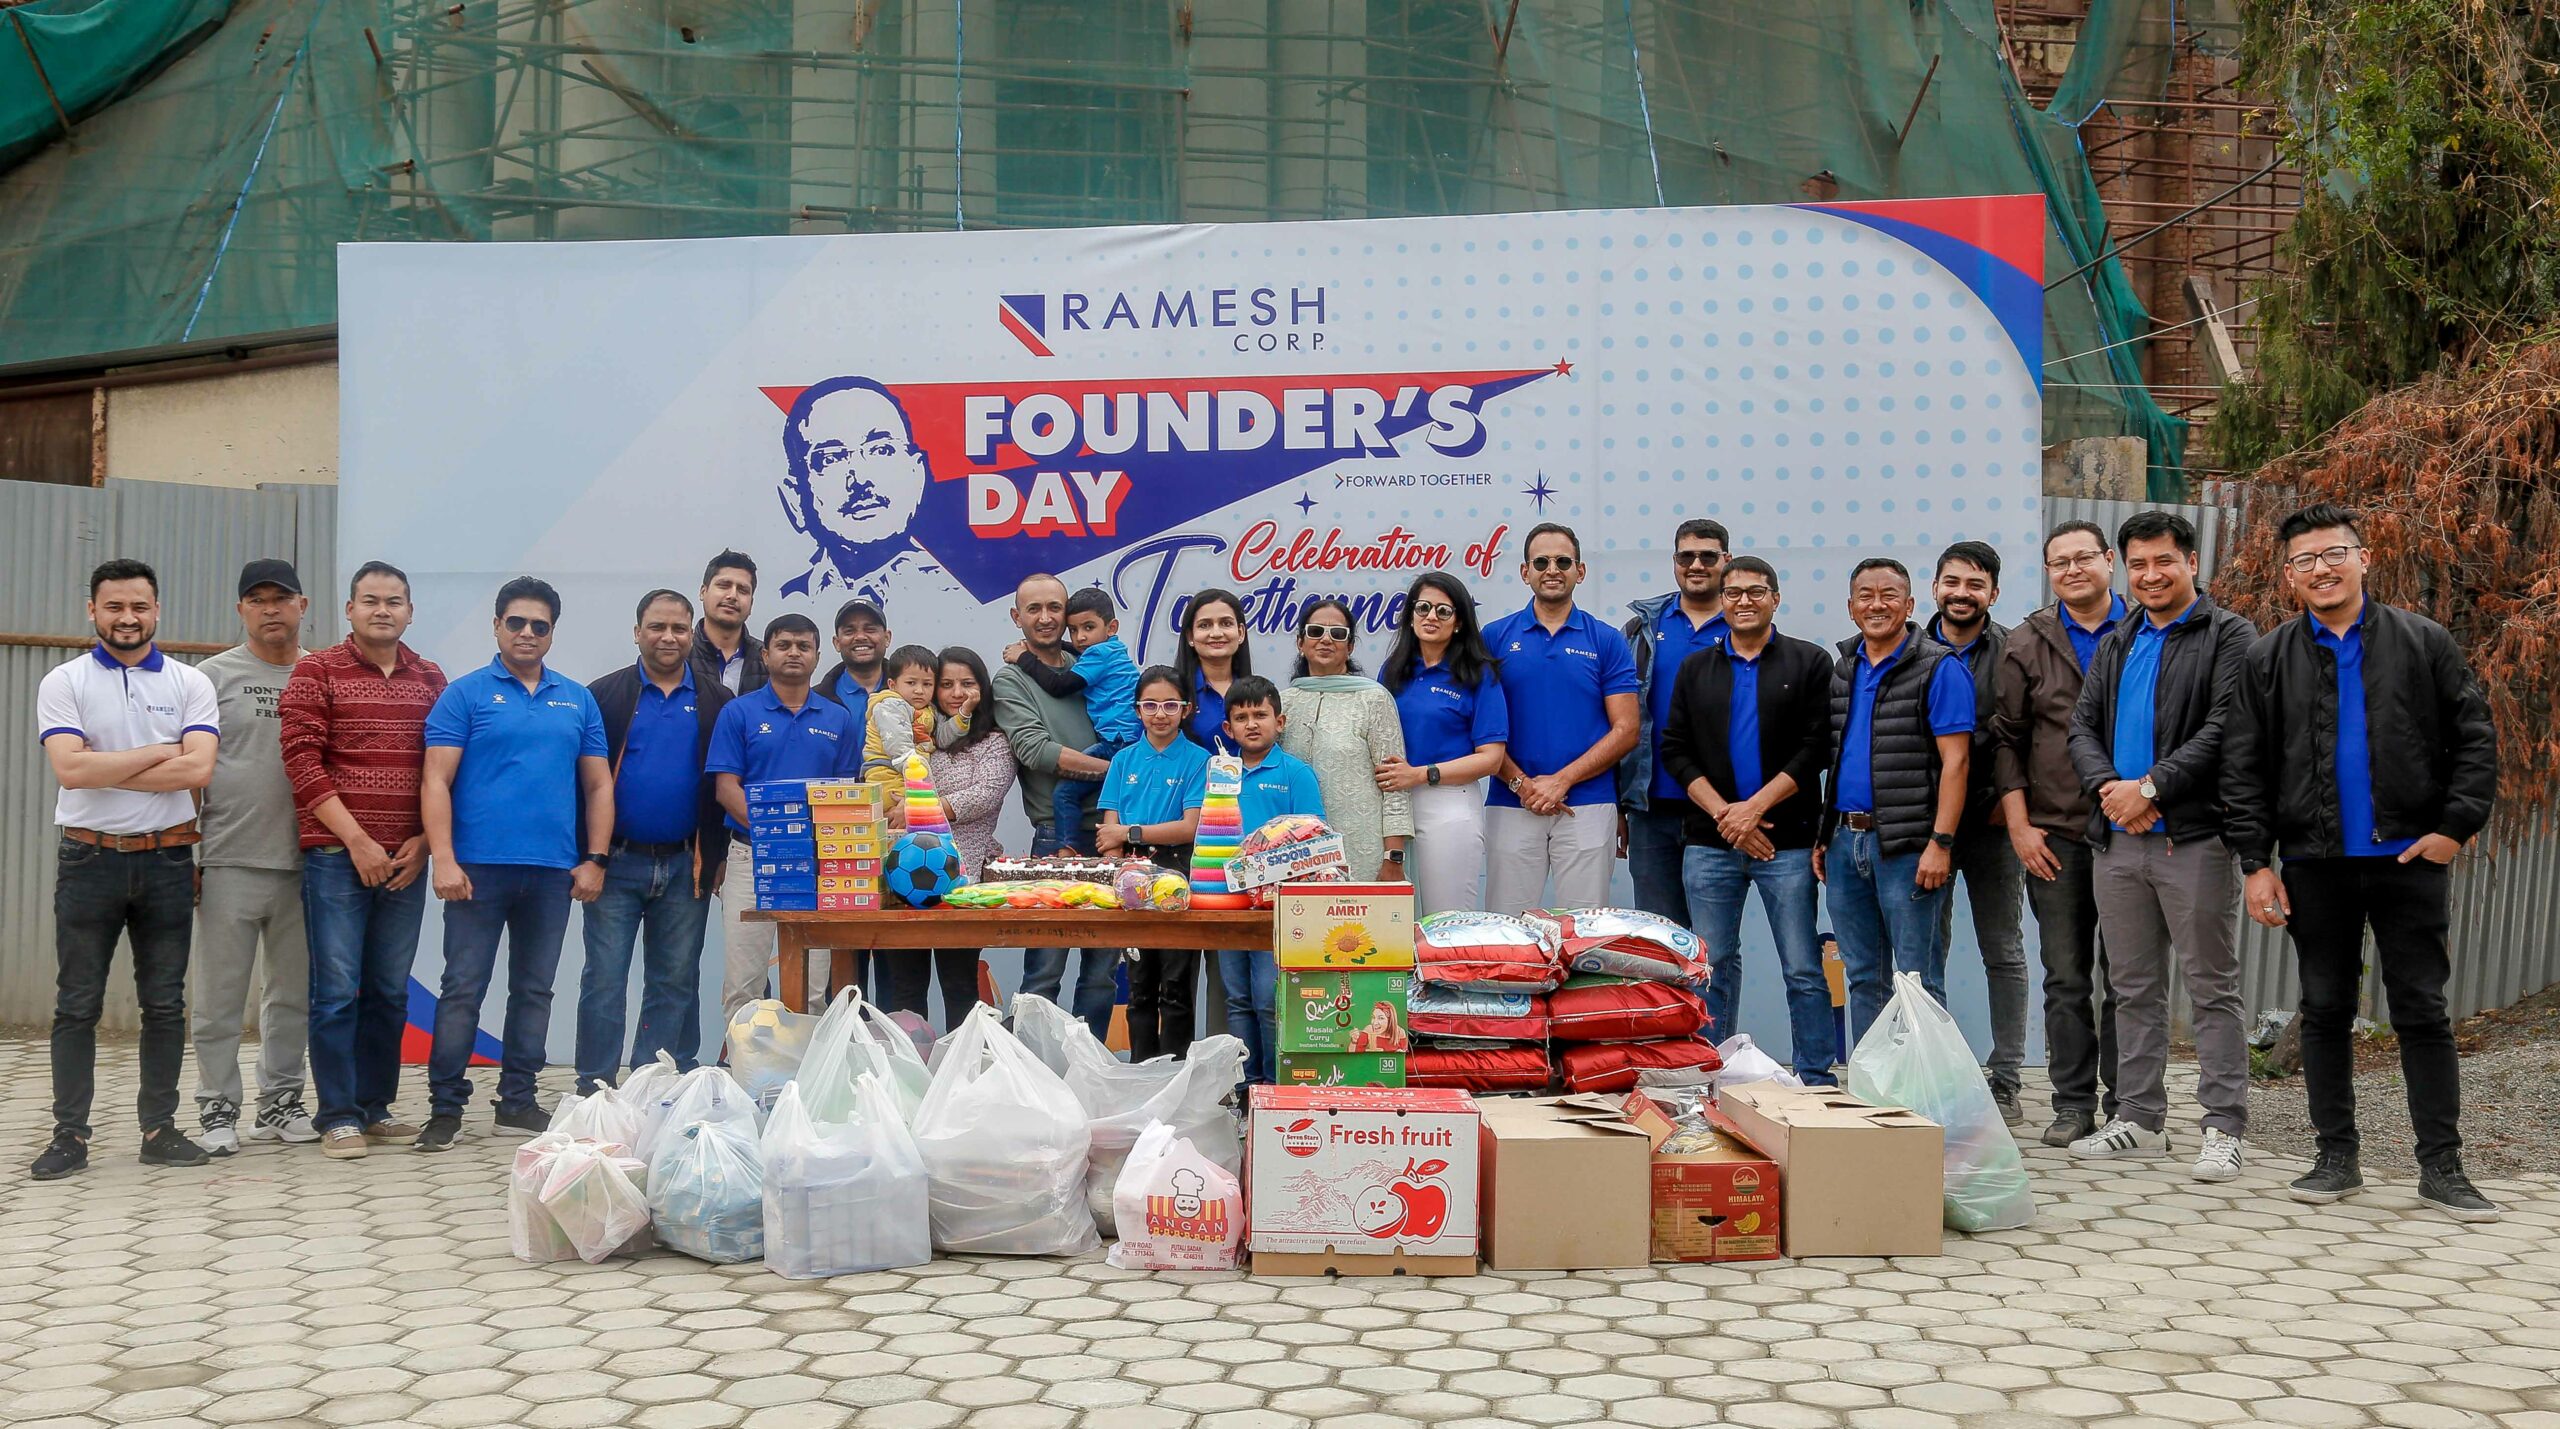 Ramesh Corp commemorates Founder’s Day with a CSR event